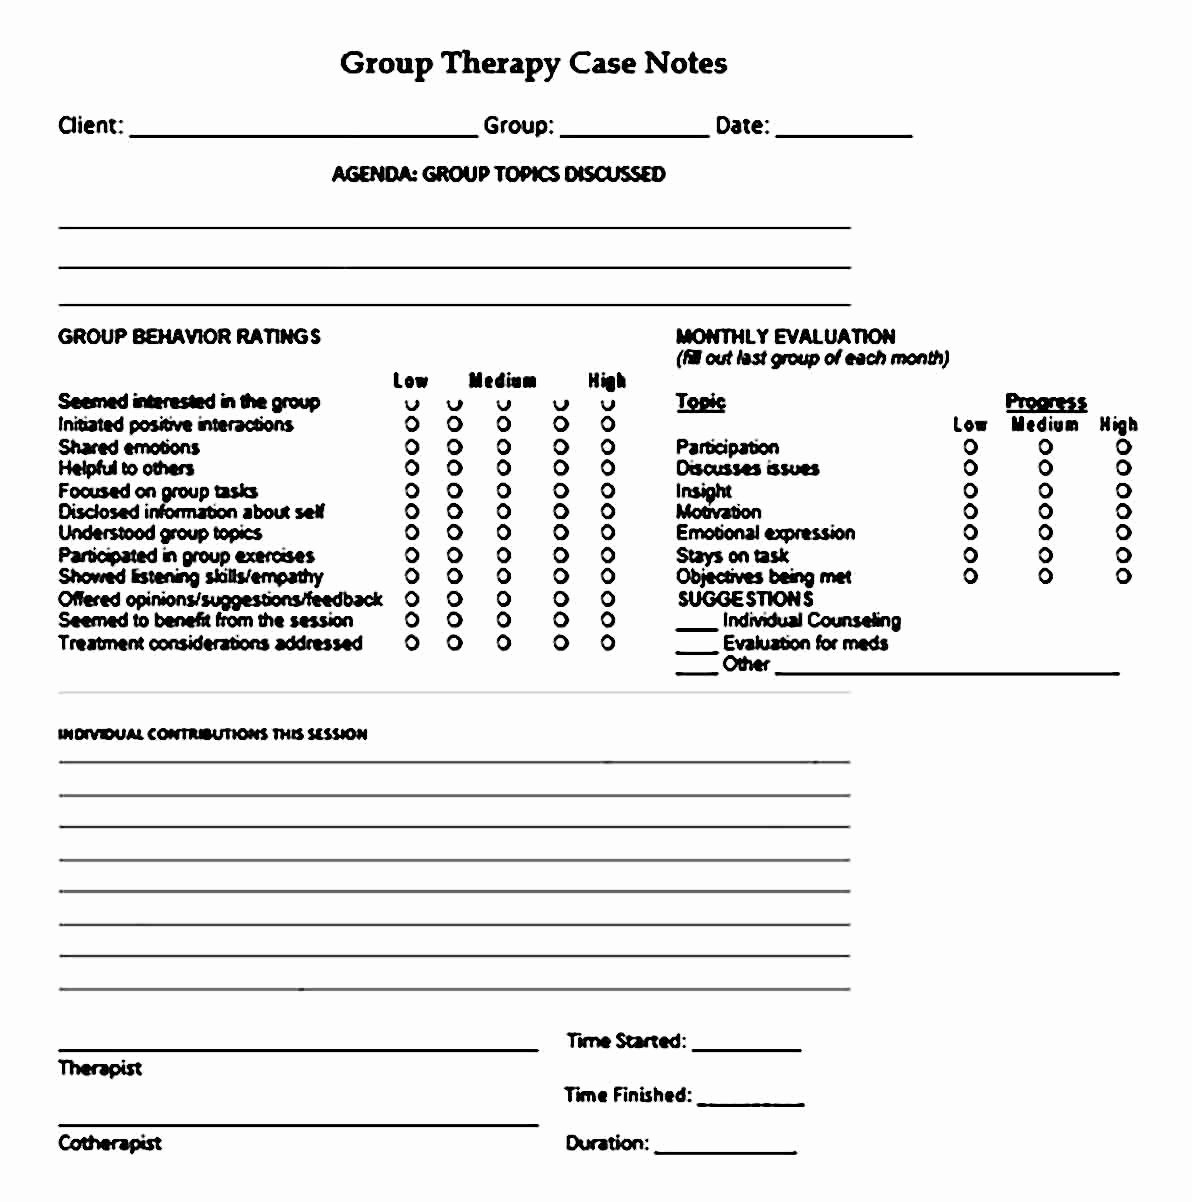 Group therapy Note Template Best Of Sample theraphy Note Template